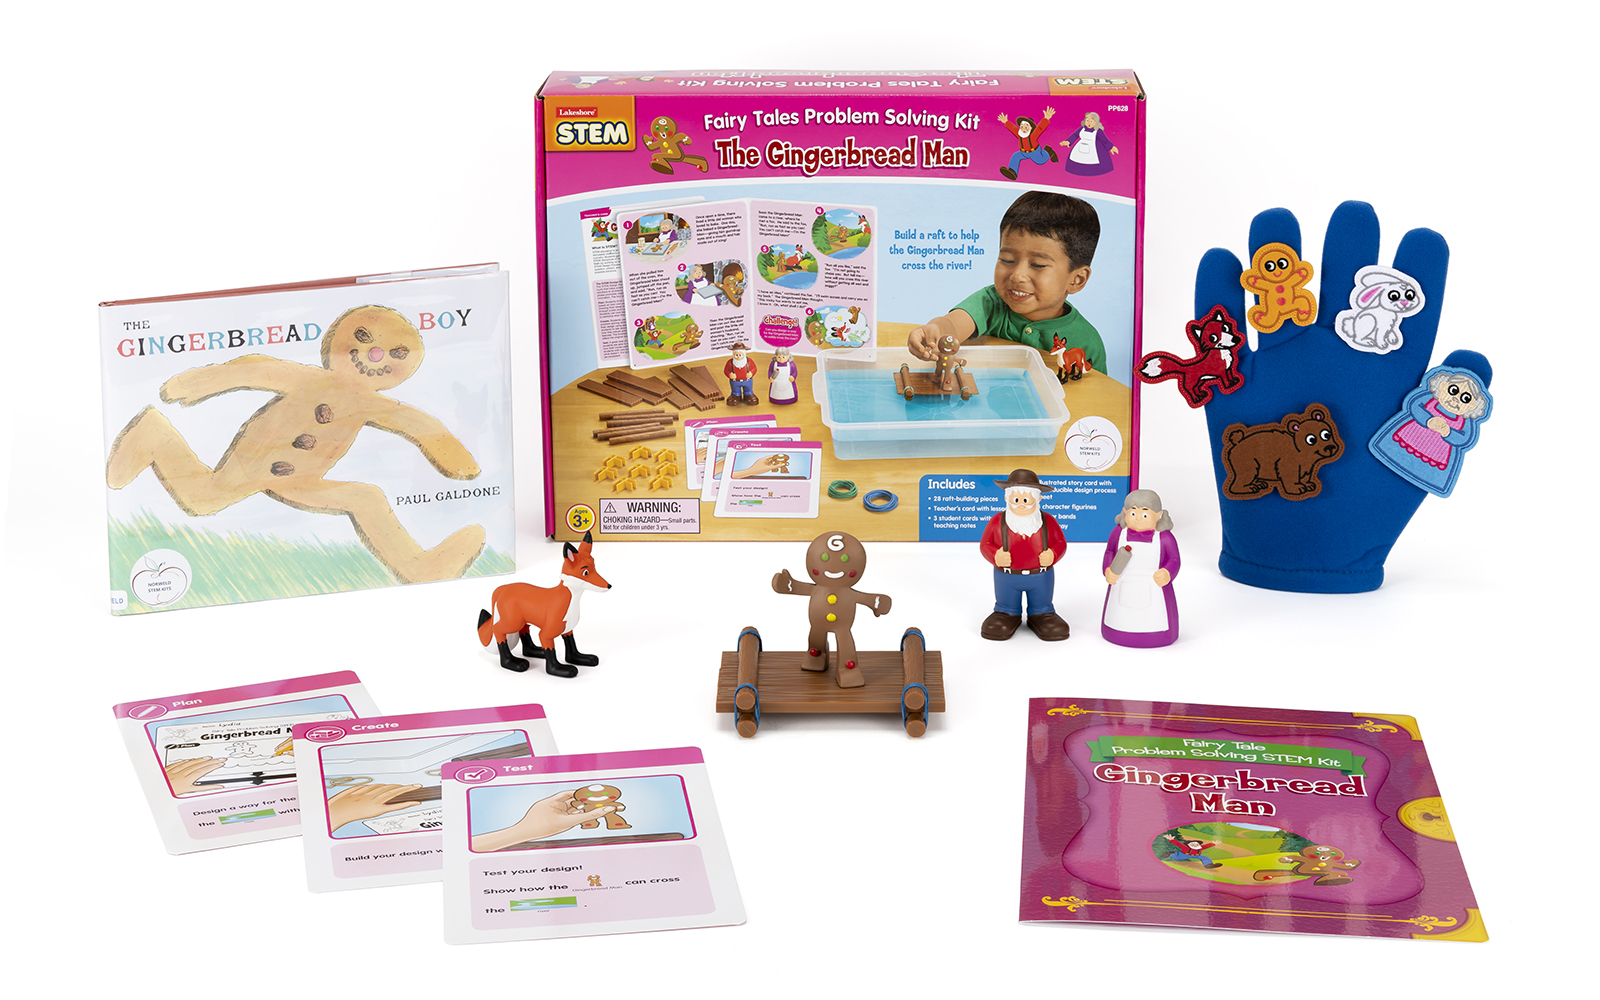 Contents of the Gingerbread Man steam puppets and early literacy kit